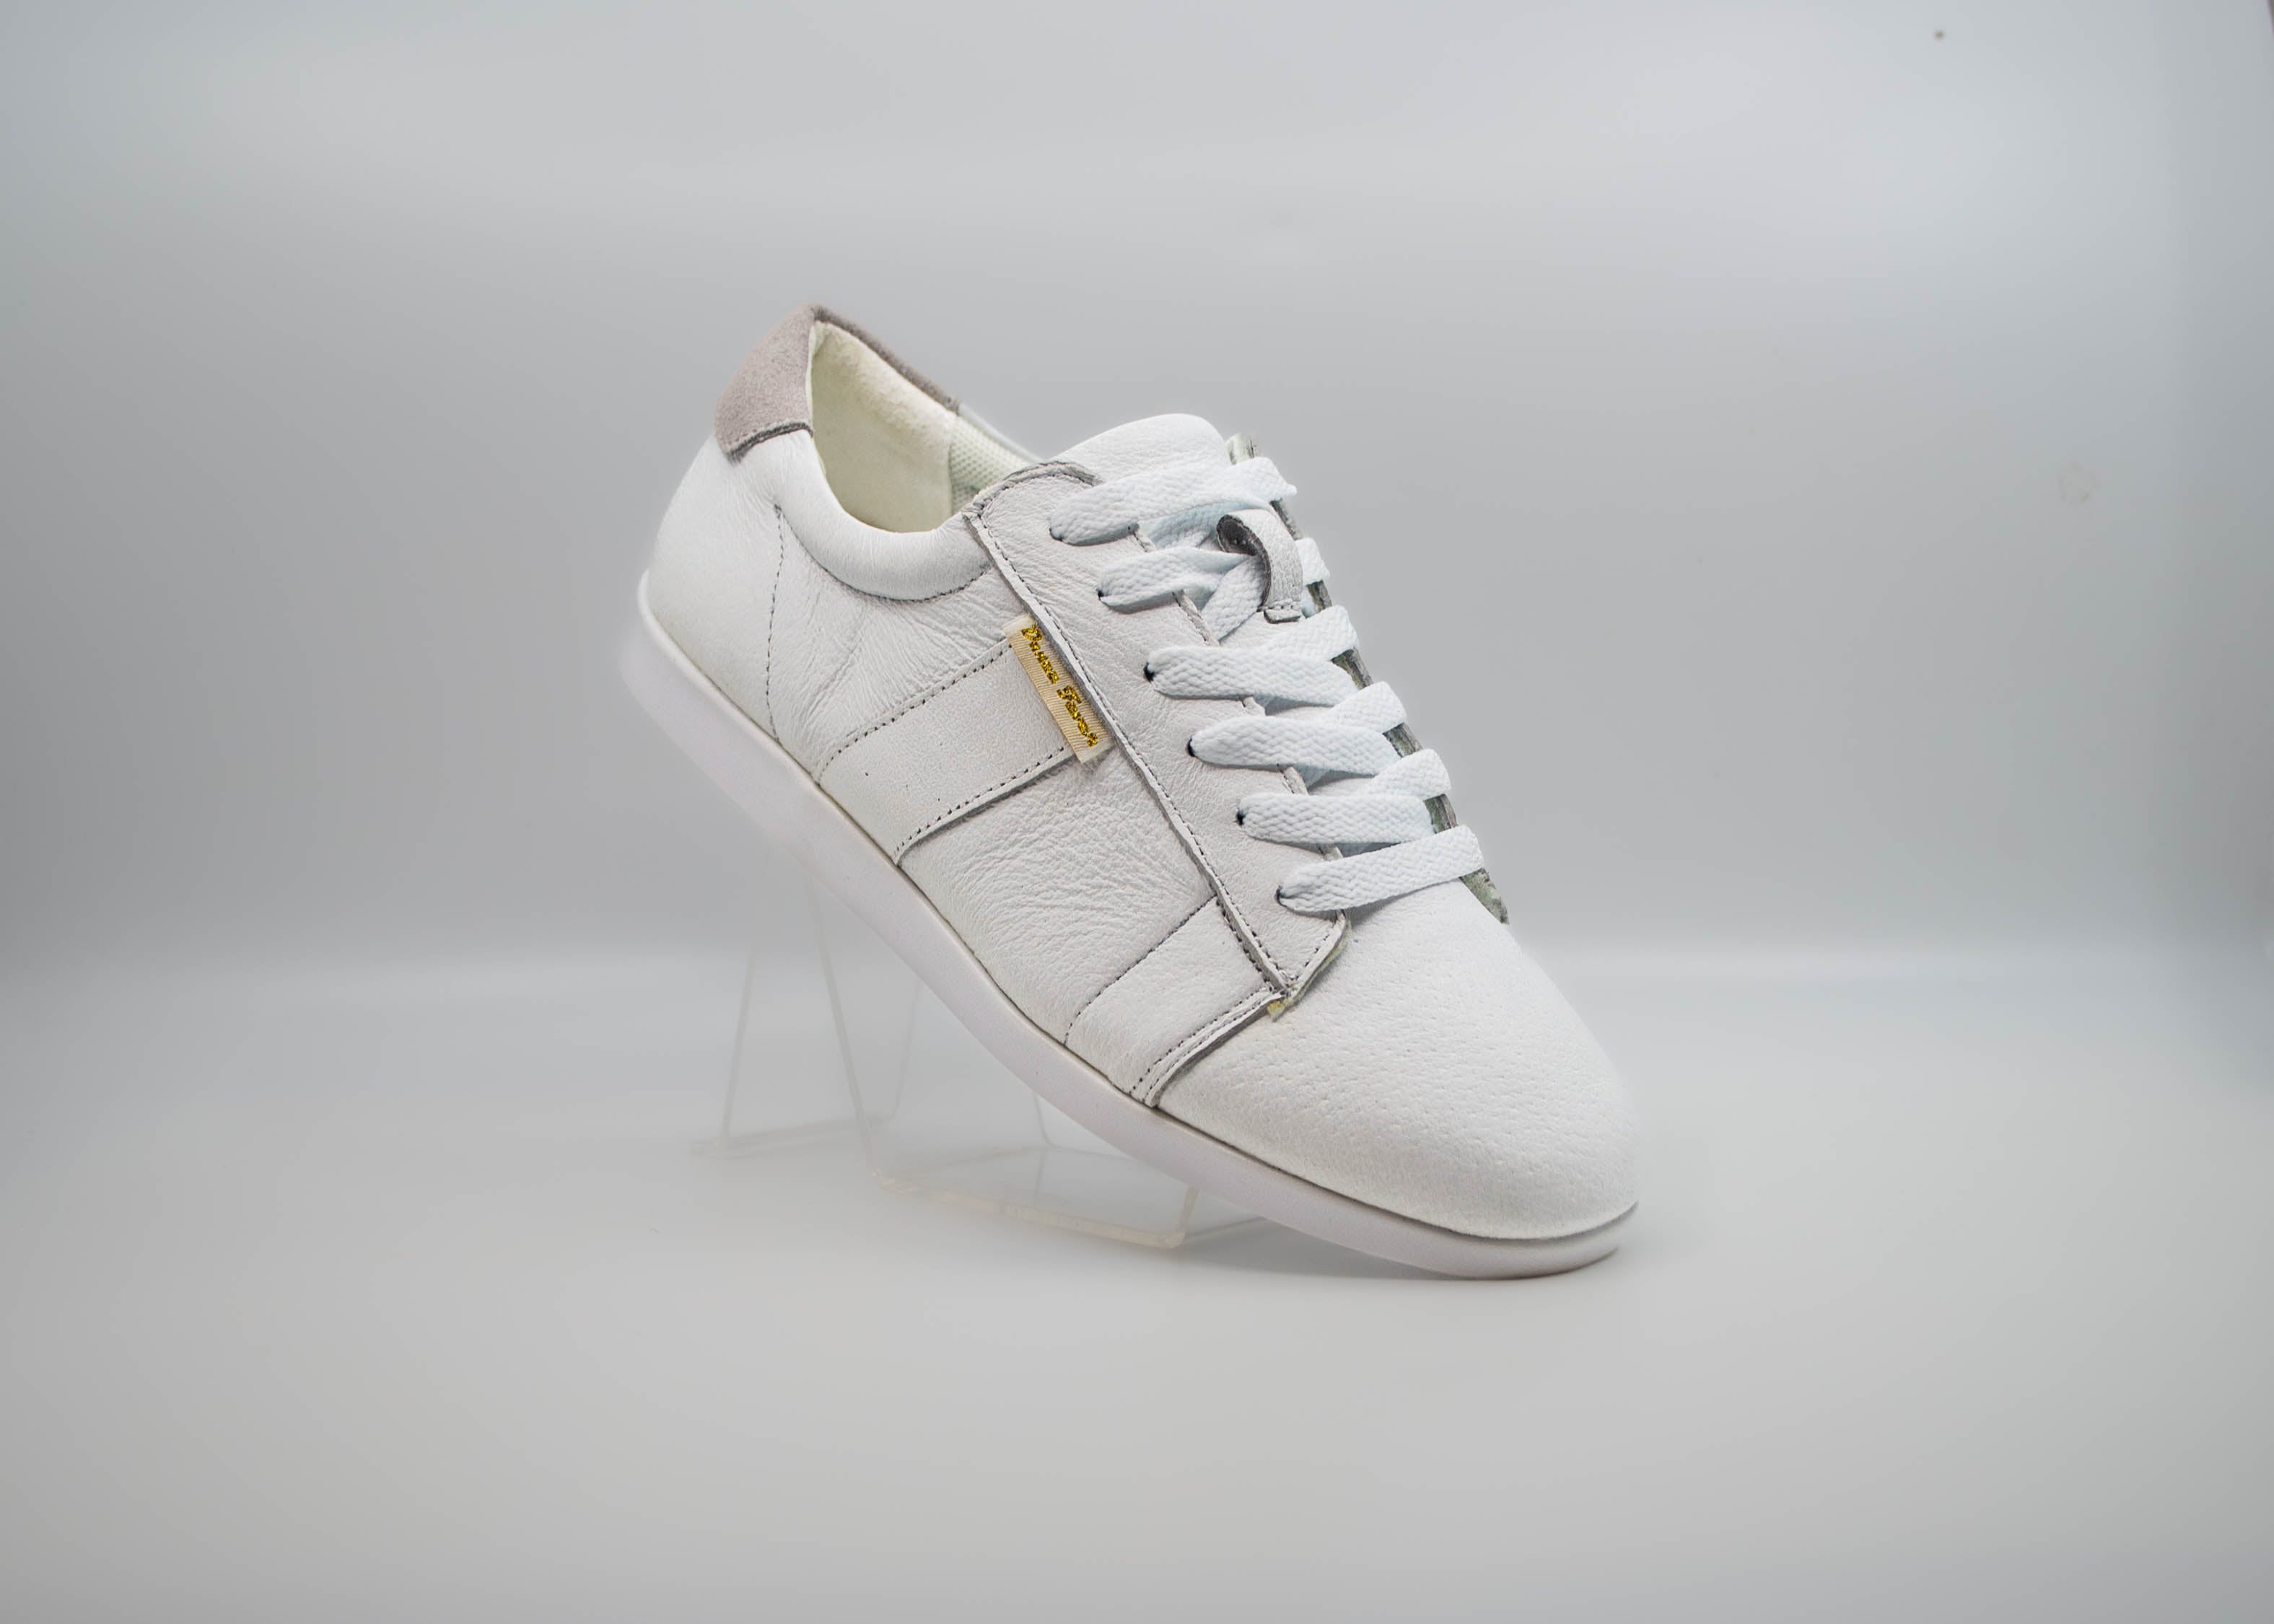 Ladies White Leather Dance Sneakers with Dual Pivot Point, Spin Spots & Flexible, Smooth Sole - (2306W) - Rockabilly Australia Pty Ltd